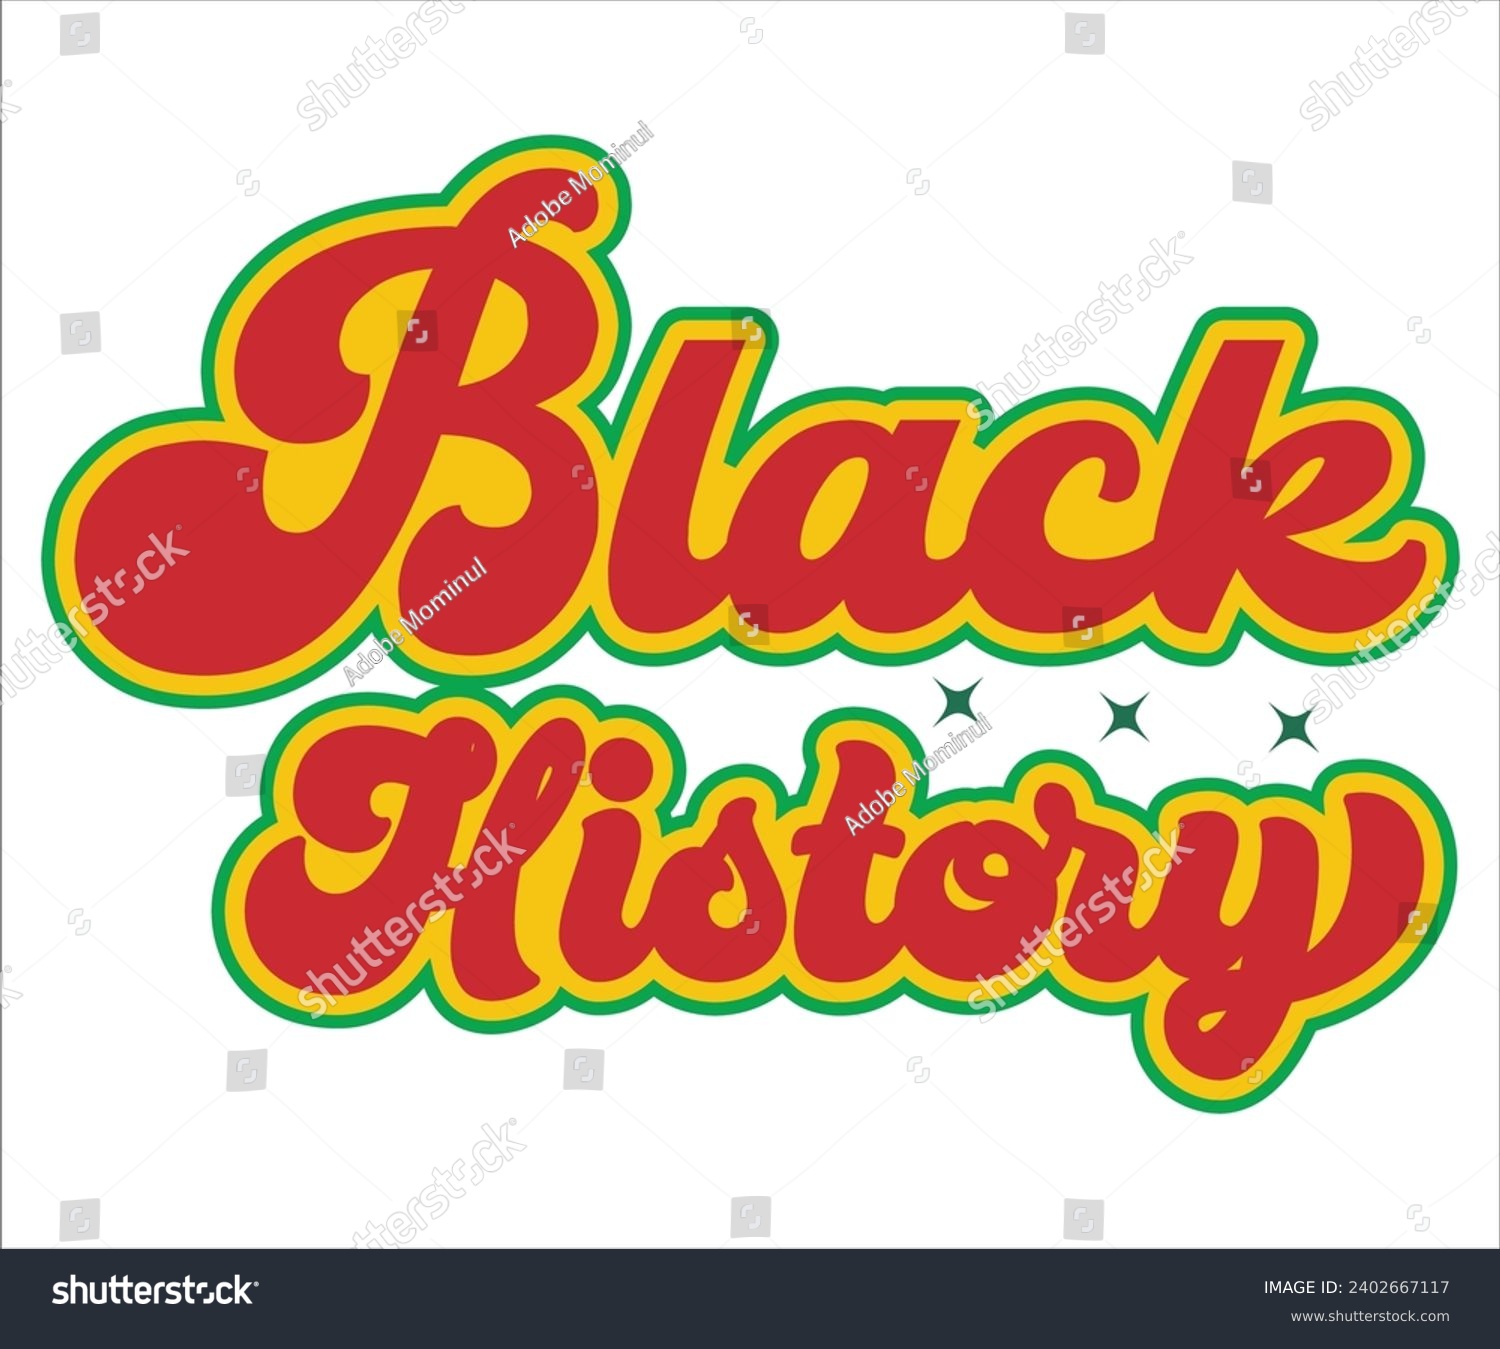 SVG of Black History Retro Svg,Black History Month Svg,Retro,Juneteenth Svg,Black History Quotes,Black People Afro American T shirt,BLM Svg,Black Men Woman,In February in United States and Canada,Cut File svg